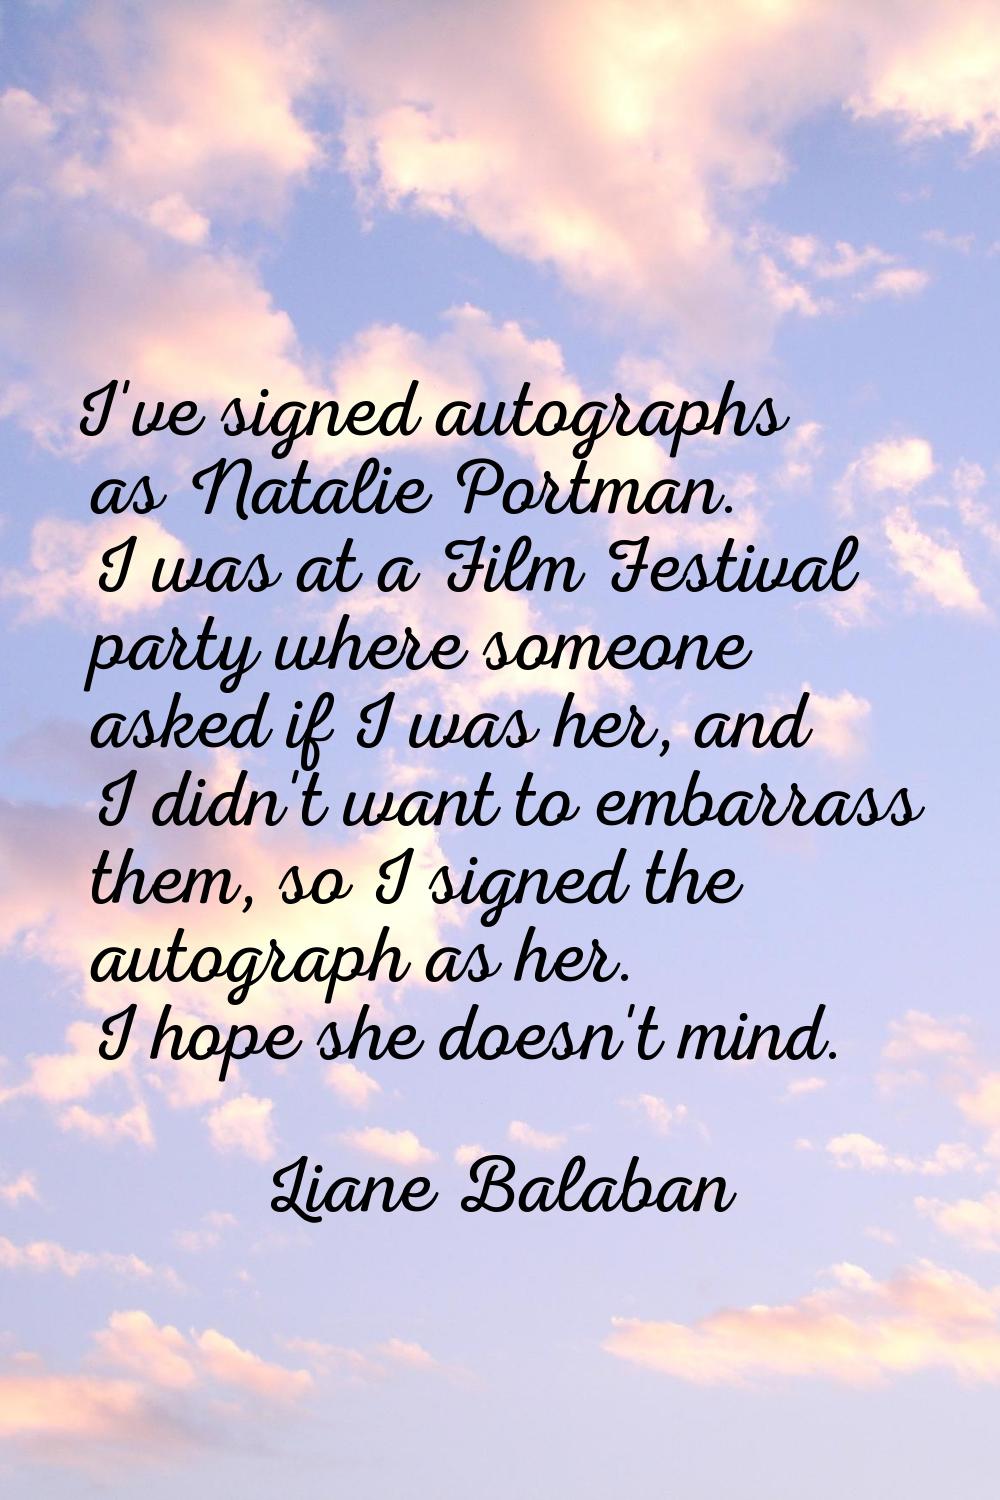 I've signed autographs as Natalie Portman. I was at a Film Festival party where someone asked if I 